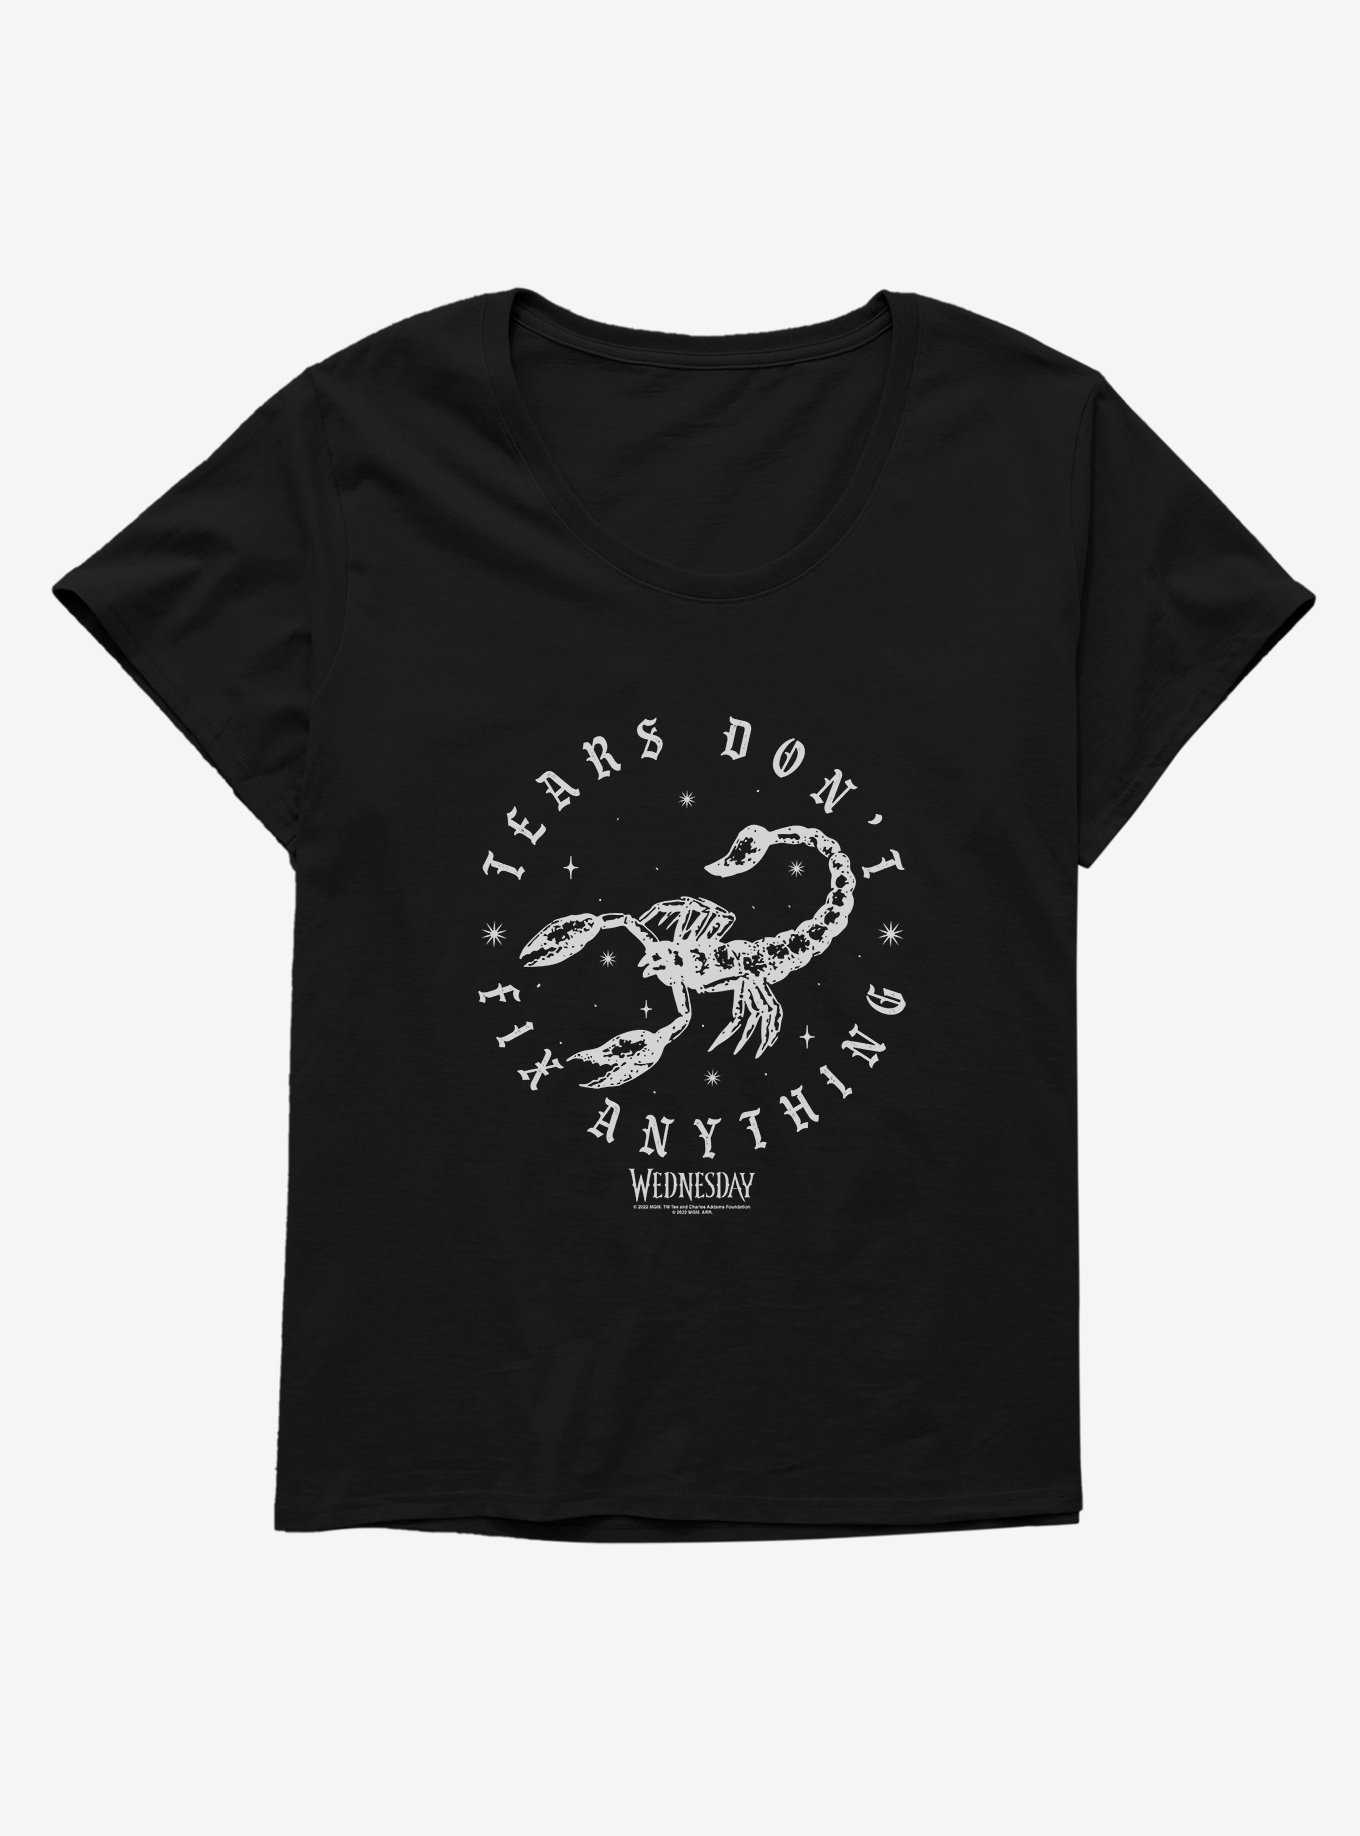 Wednesday Tears Don't Fix Anything Womens T-Shirt Plus Size, , hi-res